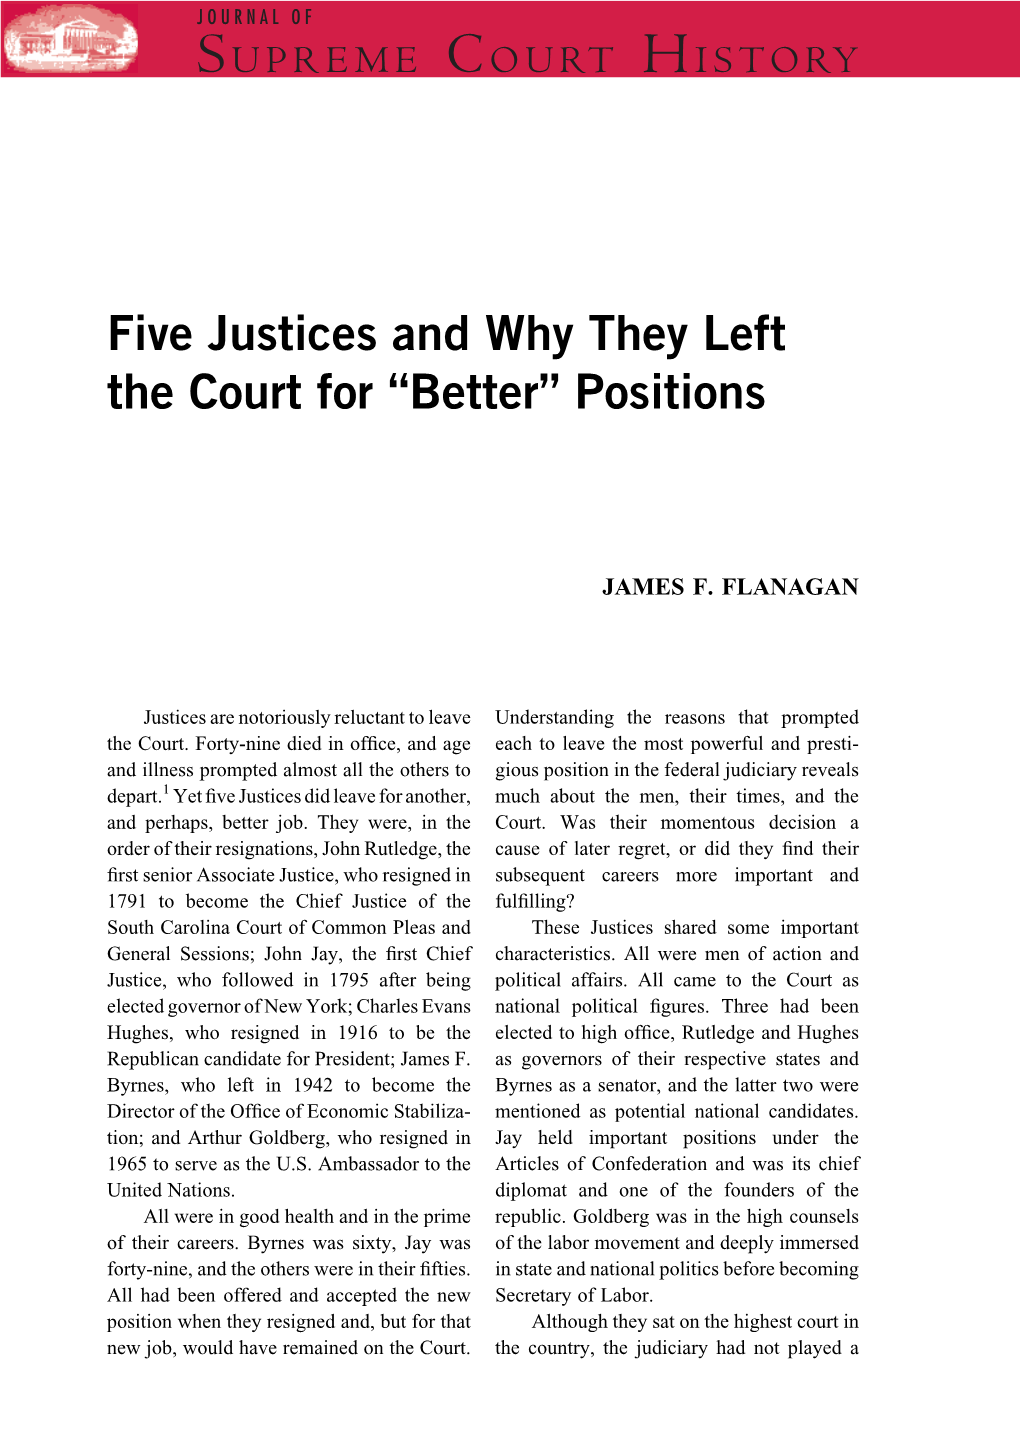 Five Justices and Why They Left the Court for "Better" Positions